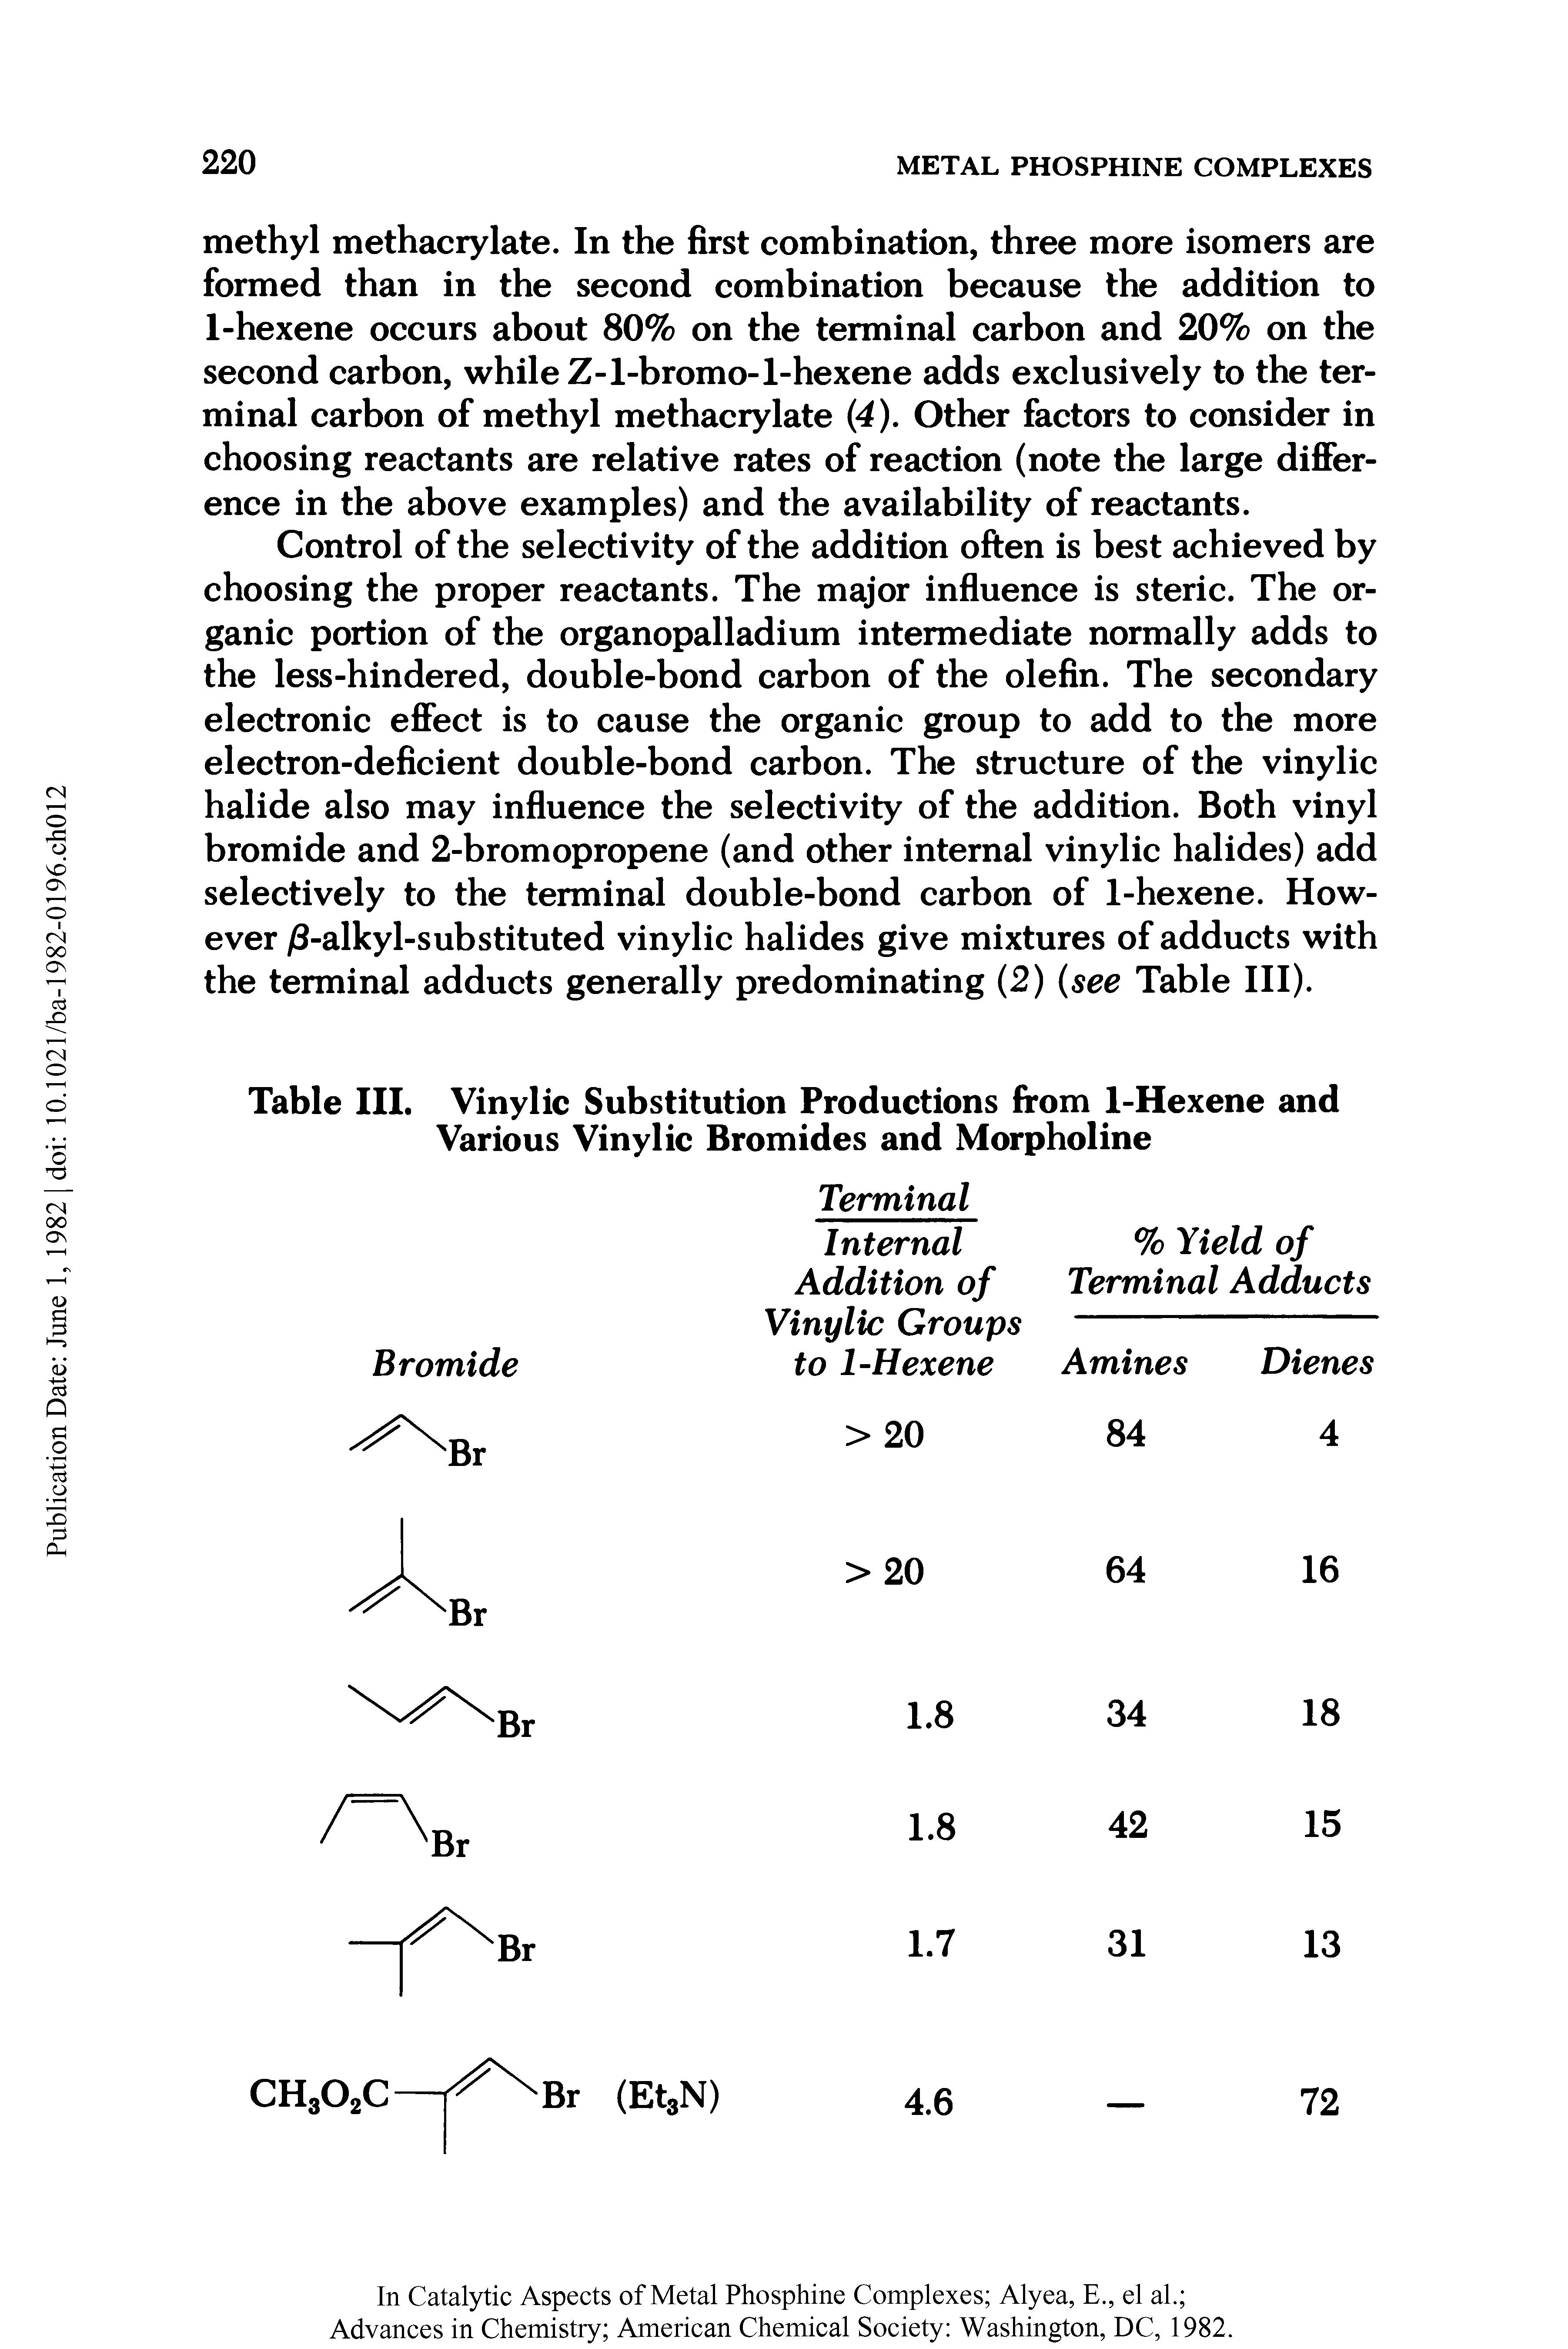 Table III. Vinylic Substitution Productions from 1-Hexene and Various Vinylic Bromides and Morpholine ...